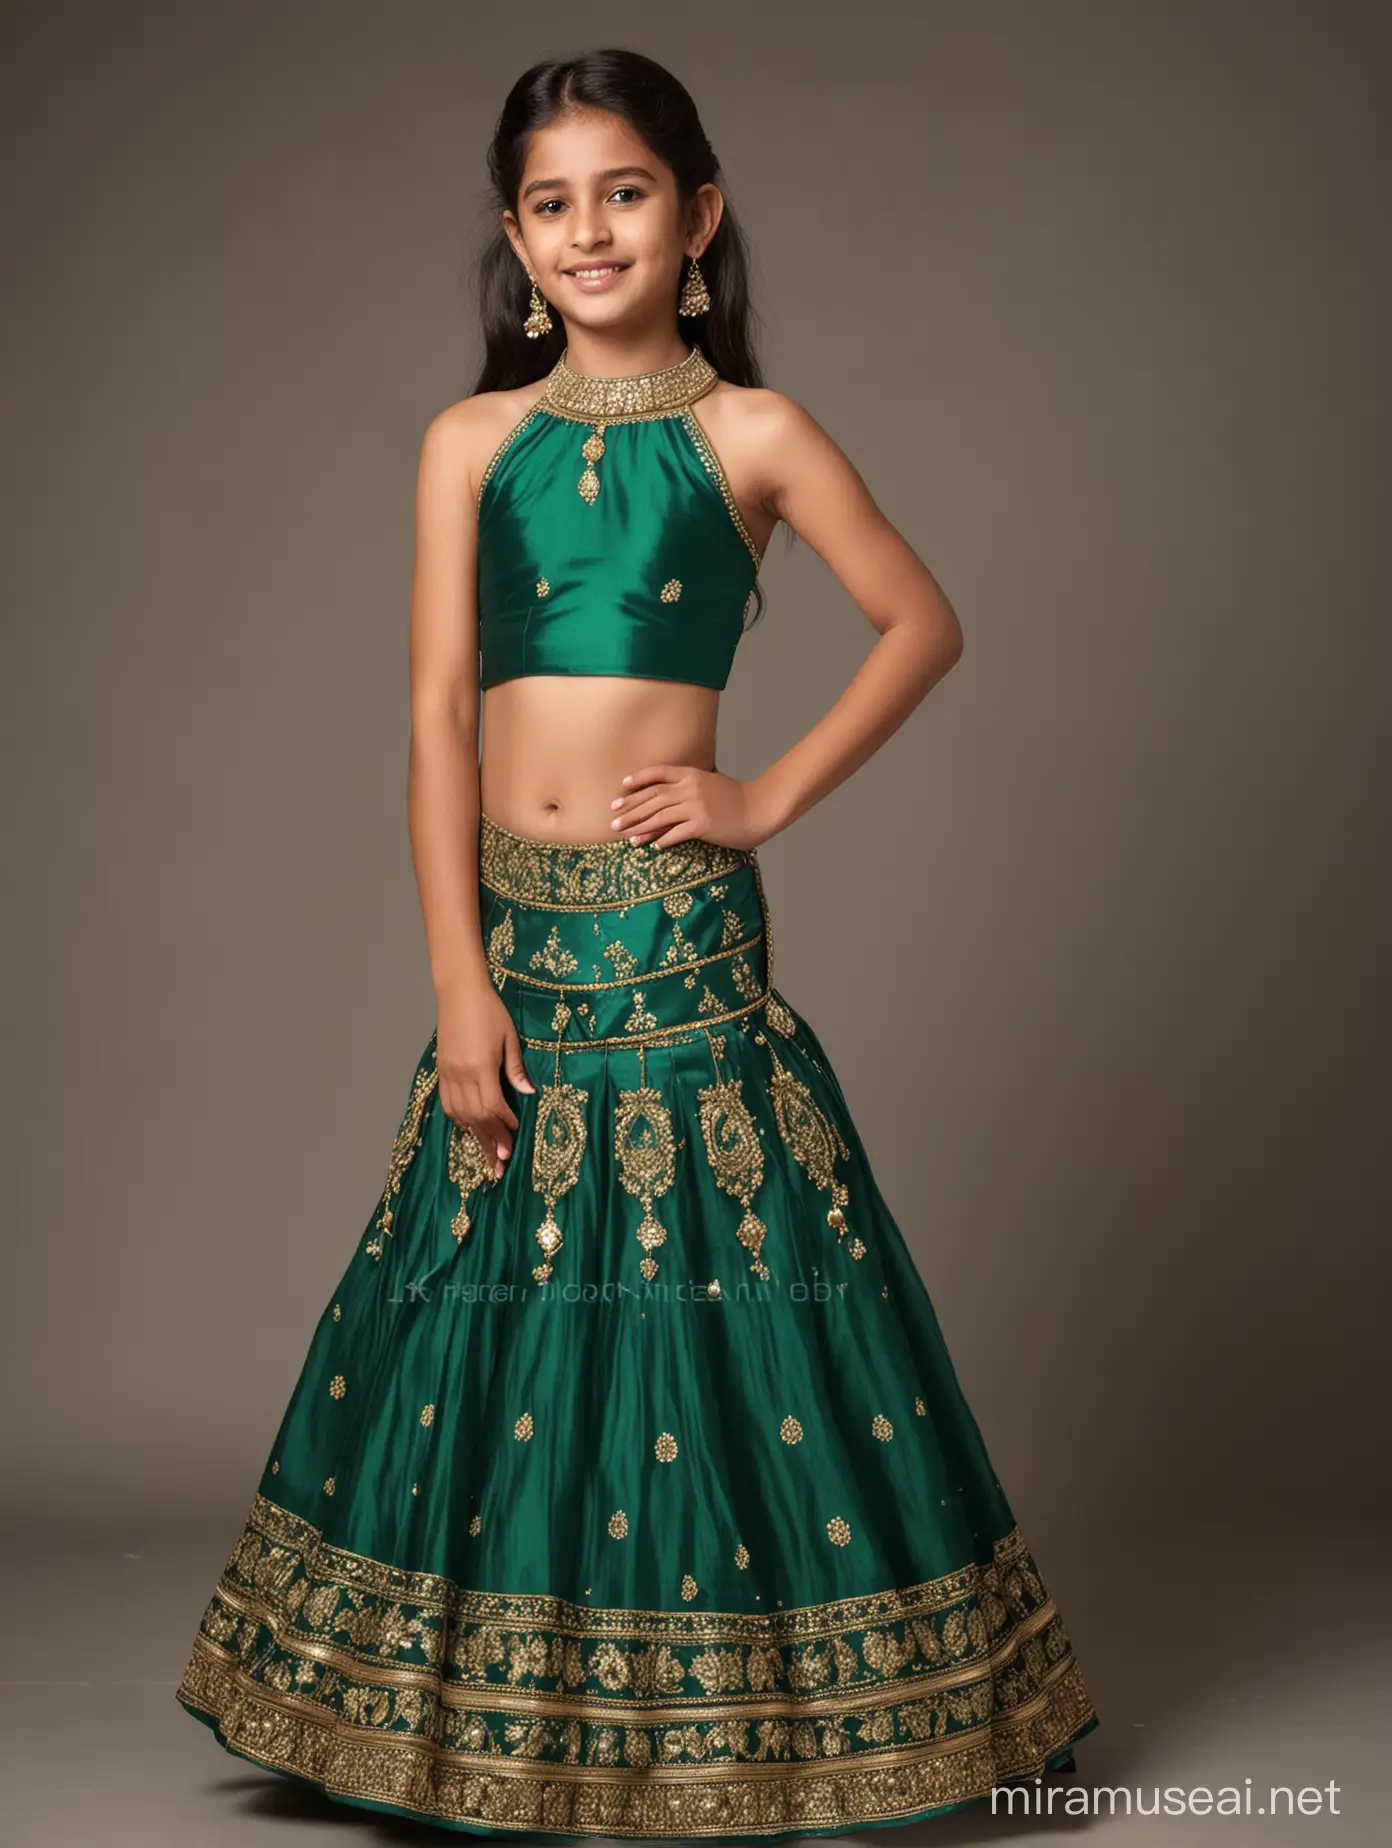 12 years old girl, fair in colour, beautiful, wearing emerald green halter neck choli with lehenga, front and back view, on diwali